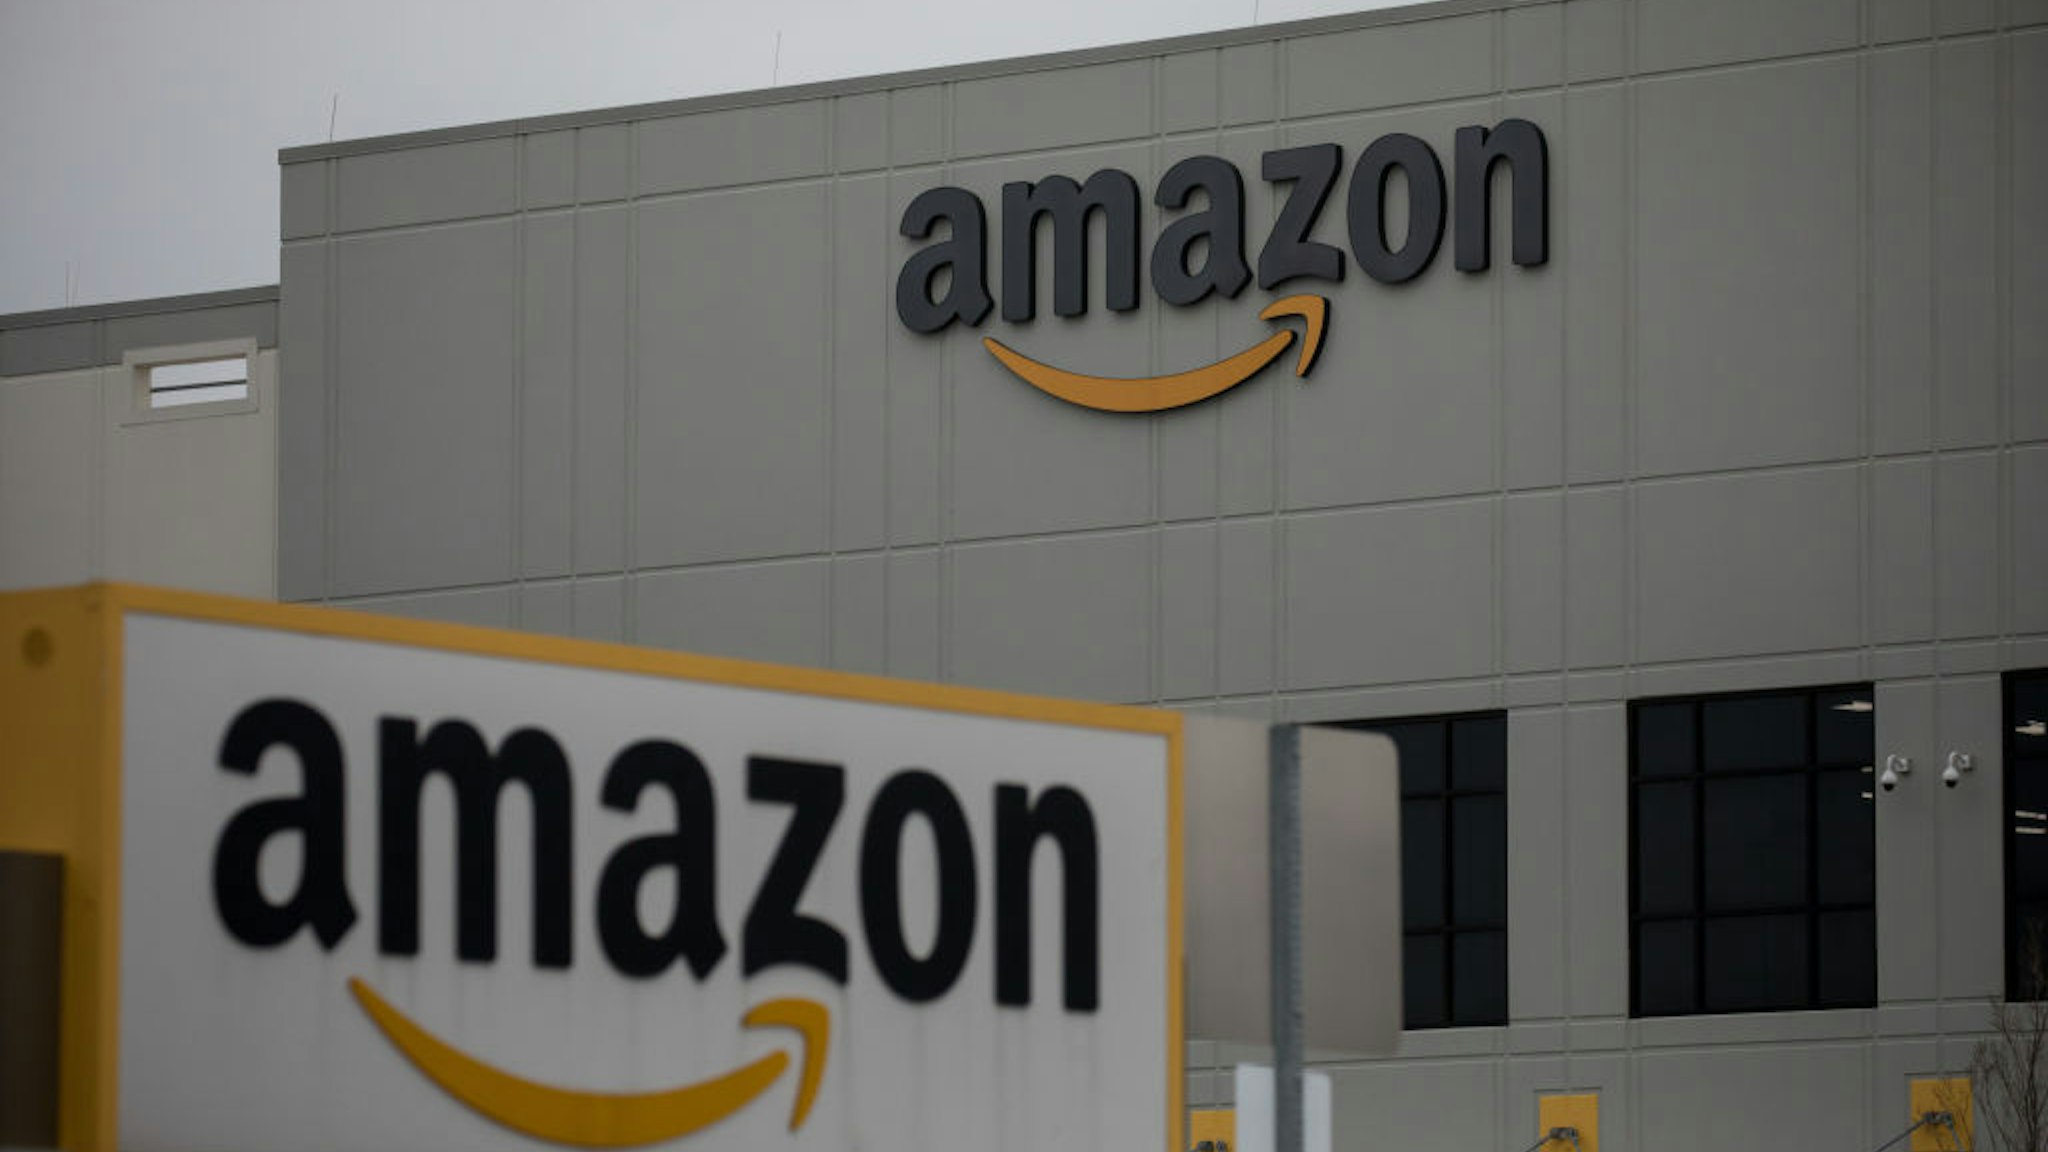 Amazon.com Inc. signage is displayed in front of a warehouse in the Staten Island borough of New York, U.S., on Tuesday, March 31, 2020.